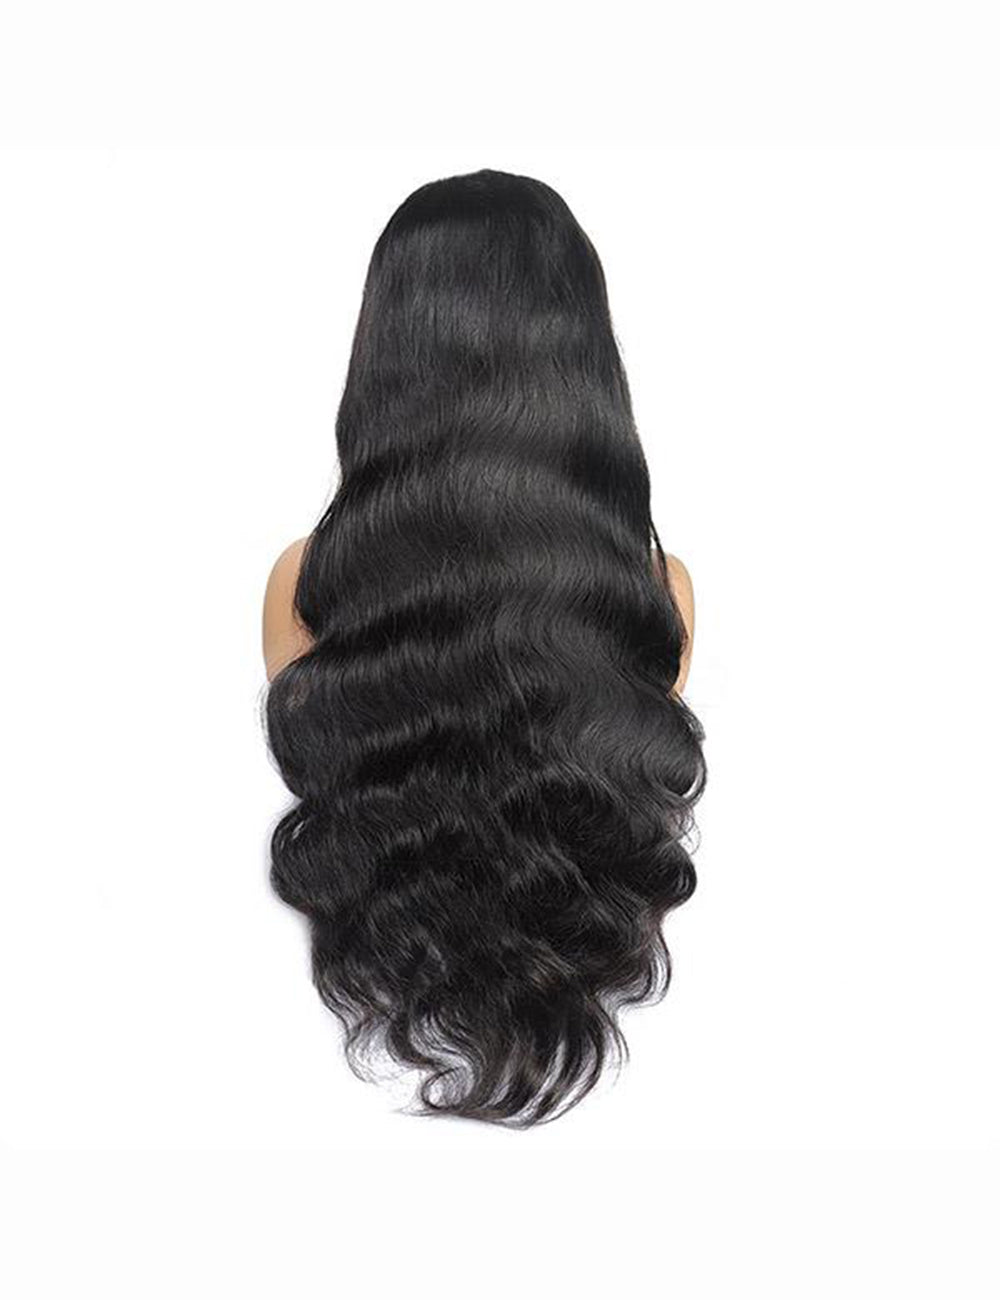 Straight Hair &amp; Body Wave Lace Wigs Affordable Glueless Human Hair Wigs